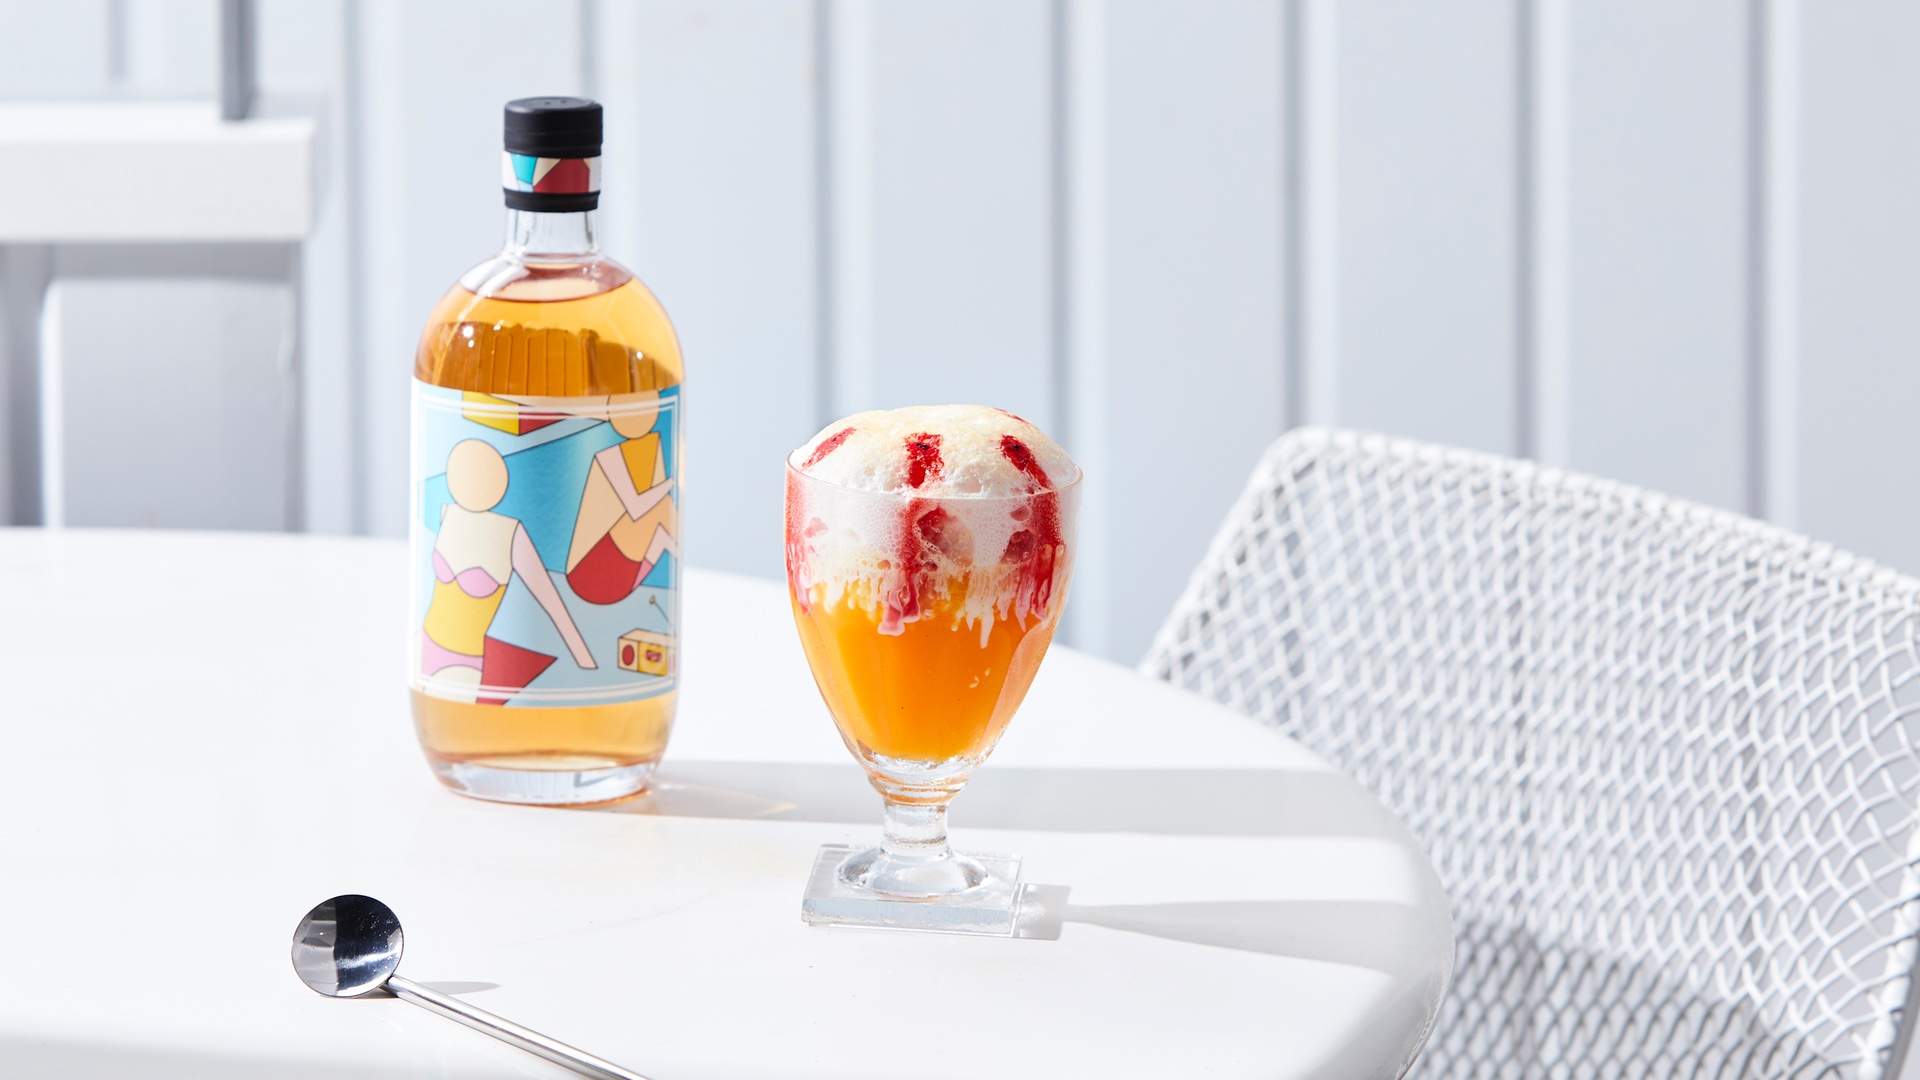 Four Pillars Is About to Release Its 2018 Christmas Gin So You Can Get Drunk on Pudding with Nan